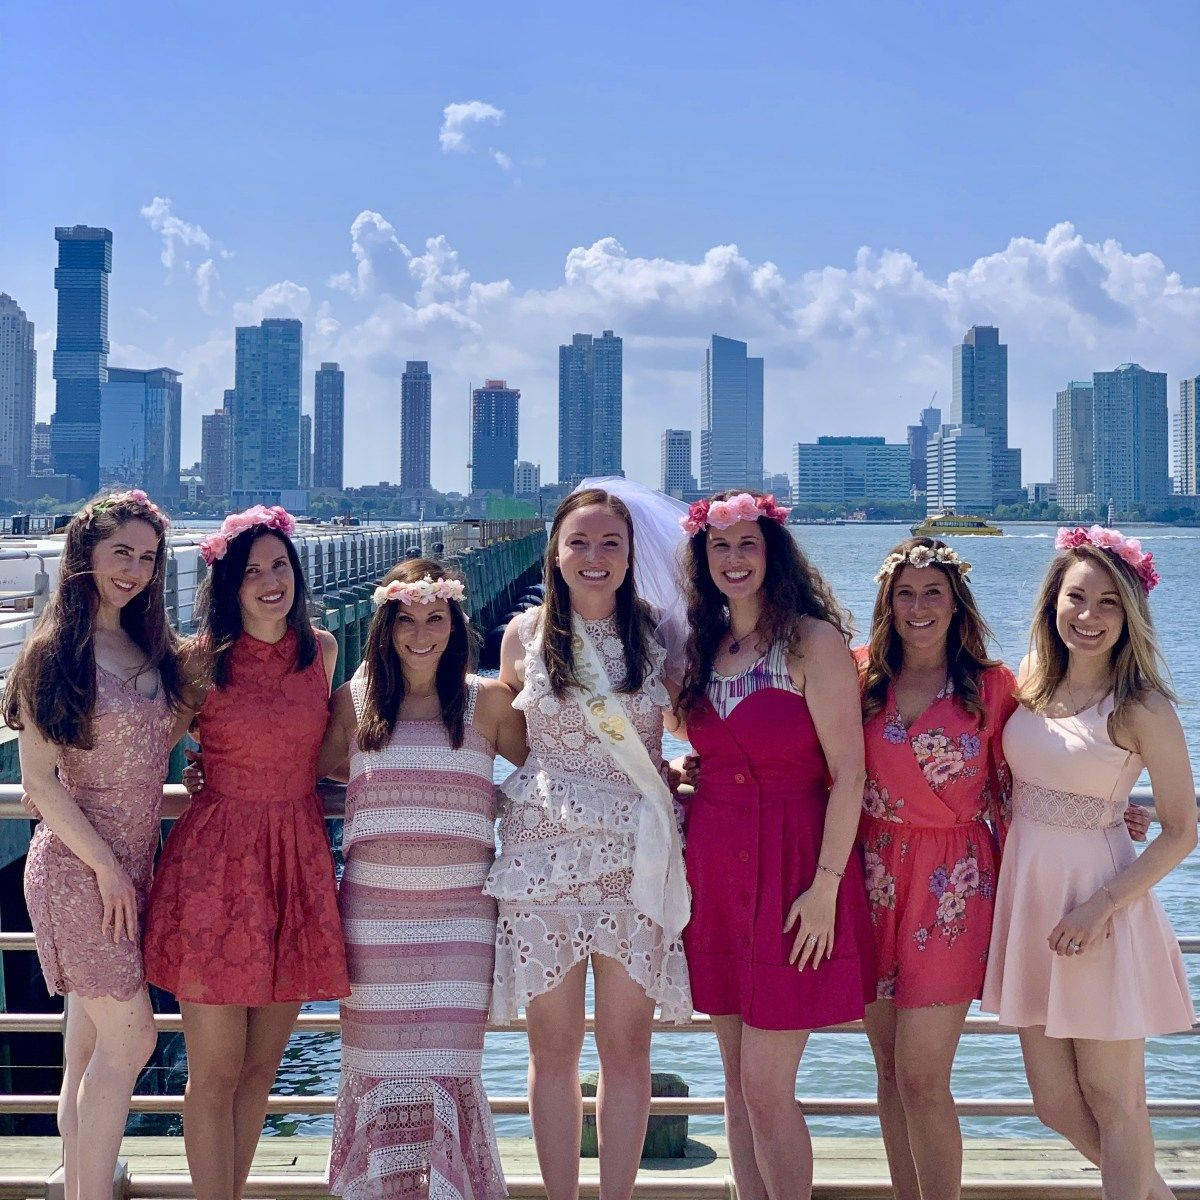 Best Bachelorette Party Ideas Nyc
 My New York City Bachelorette Party